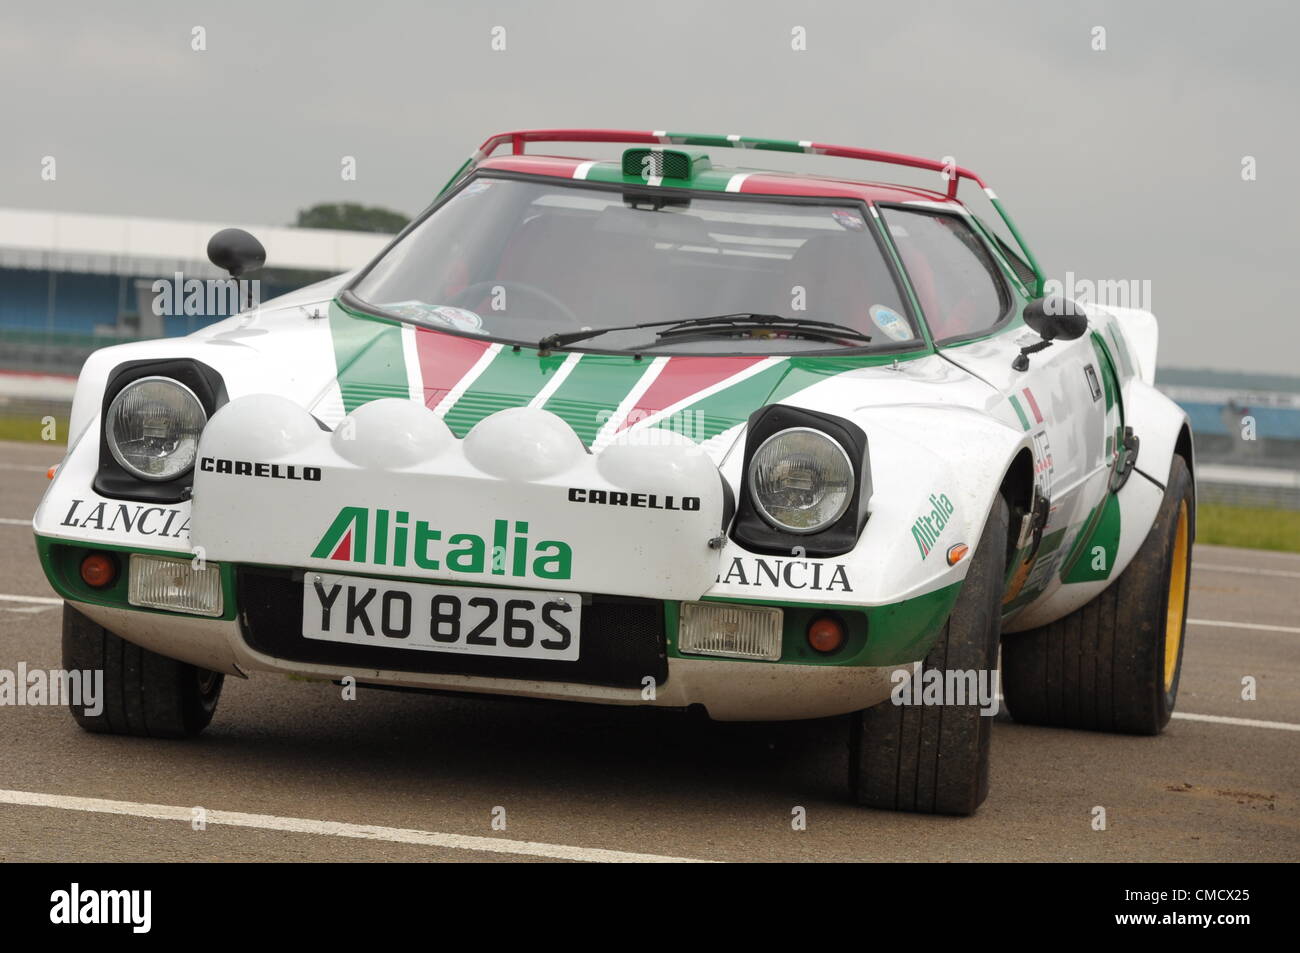 20th July 2012, Silverstone, UK A Lancia Stratos on display at Silverstone Classic 2012 Stock Photo